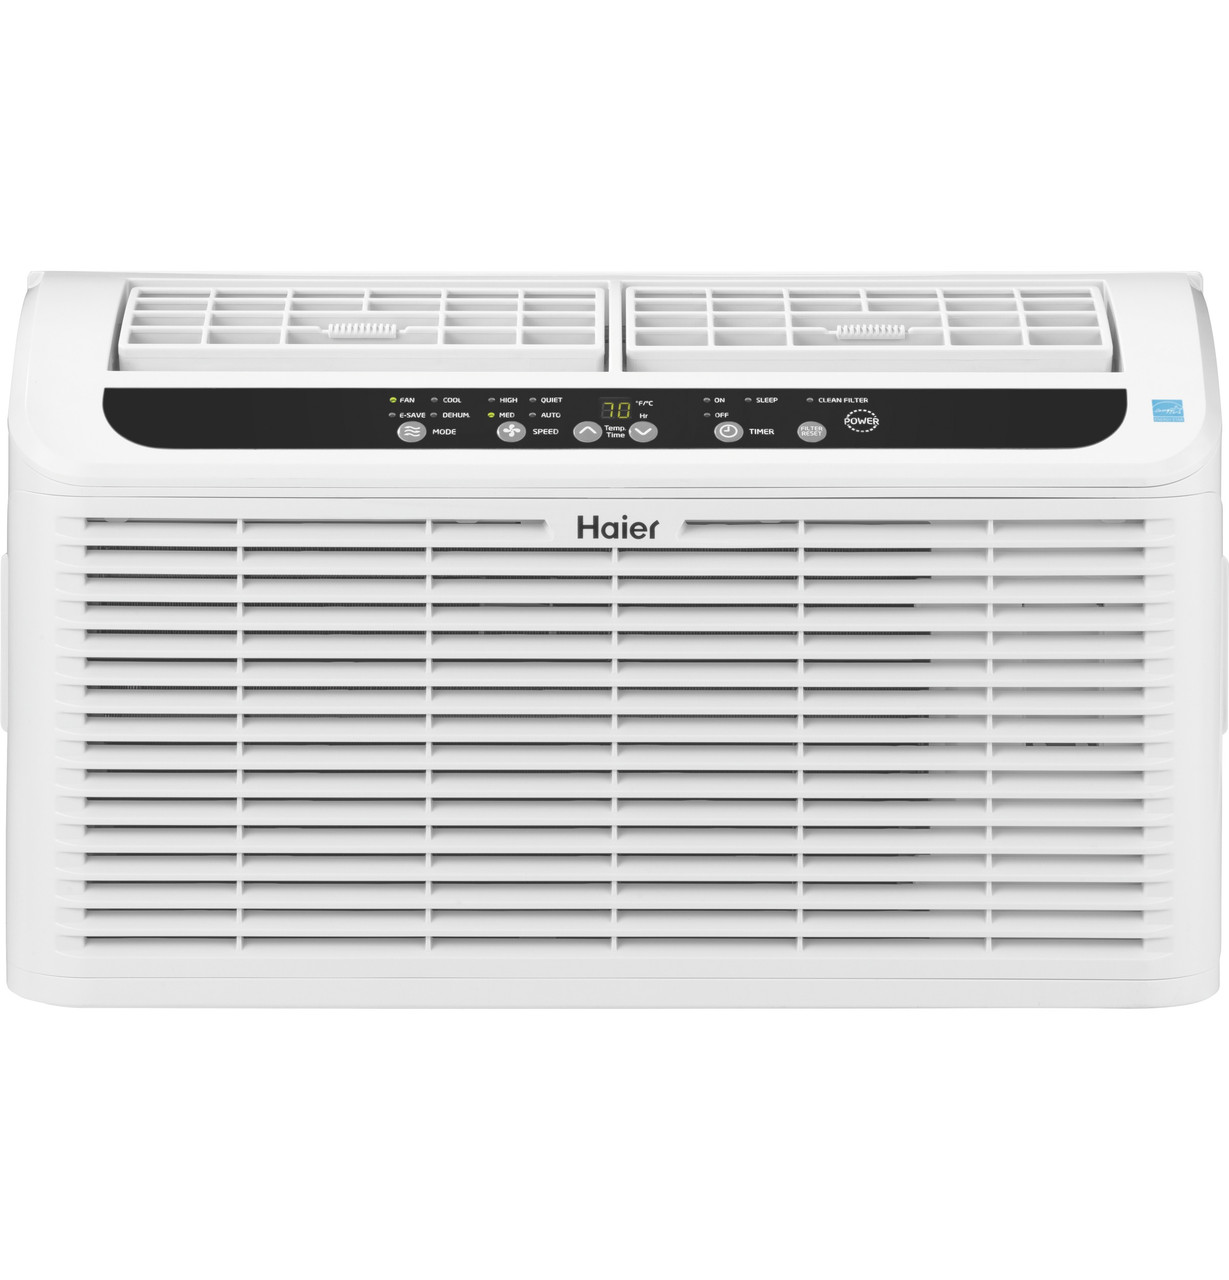 Haier ENERGY STAR® 6,200 BTU Ultra Quiet Window Air Conditioner for Small  Rooms up to 250 sq. ft.|^|ESAQ406TZ